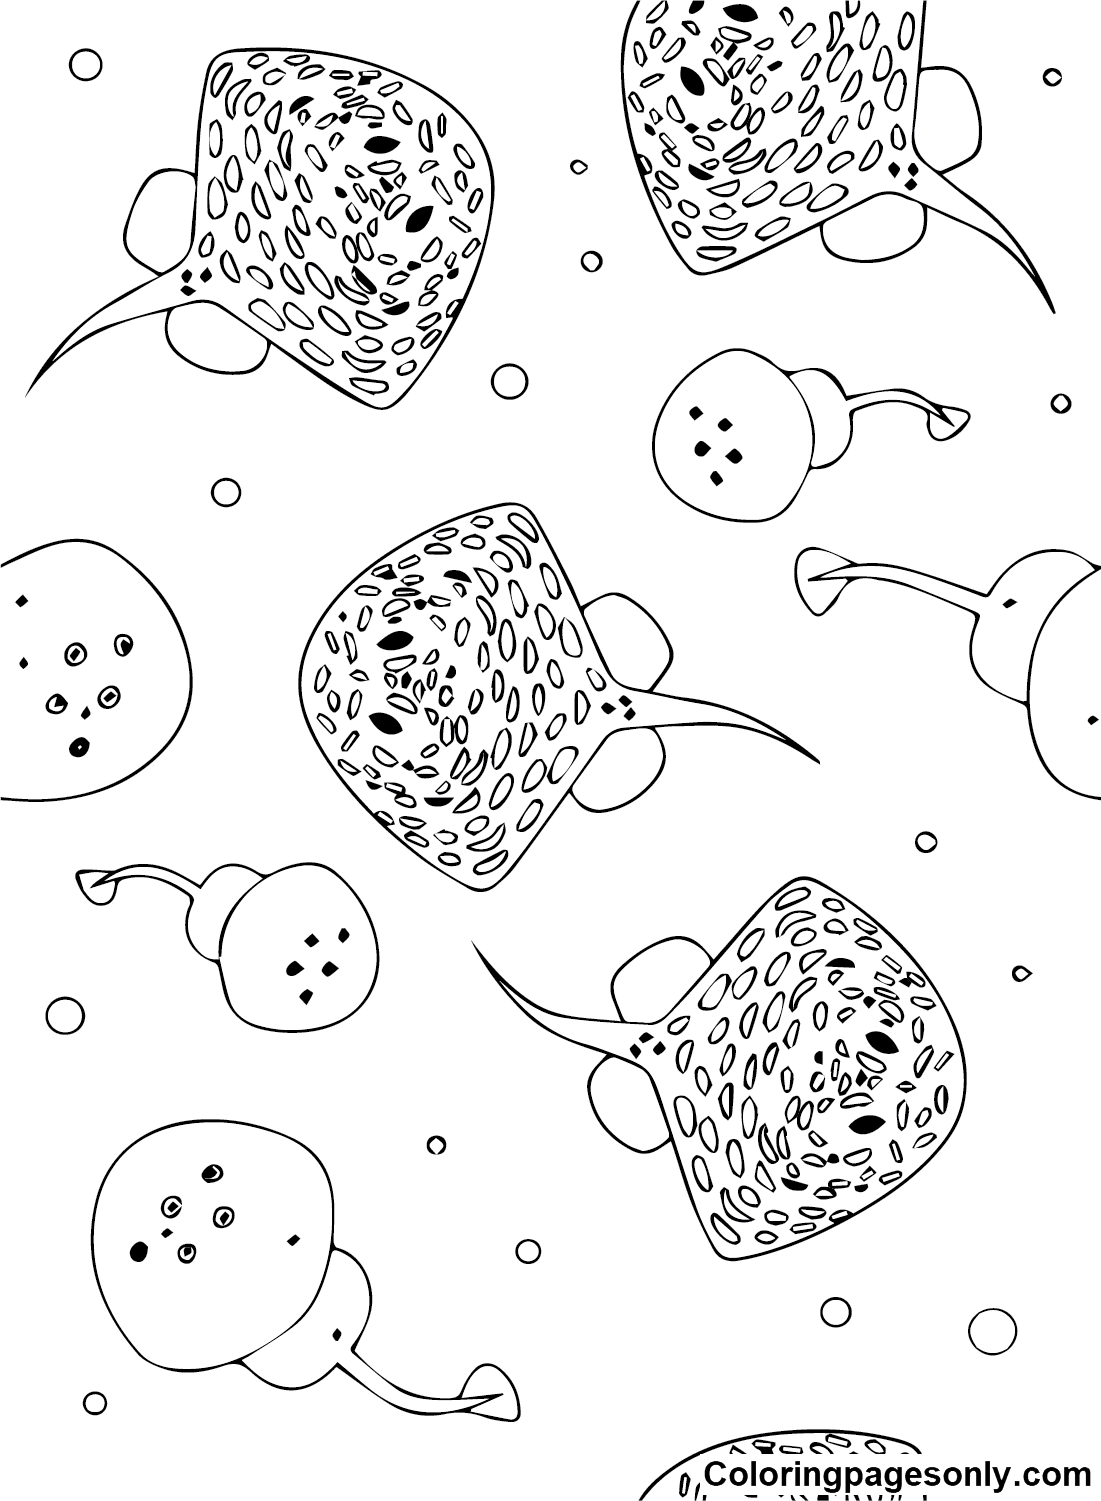 Stingray to print Coloring Pages